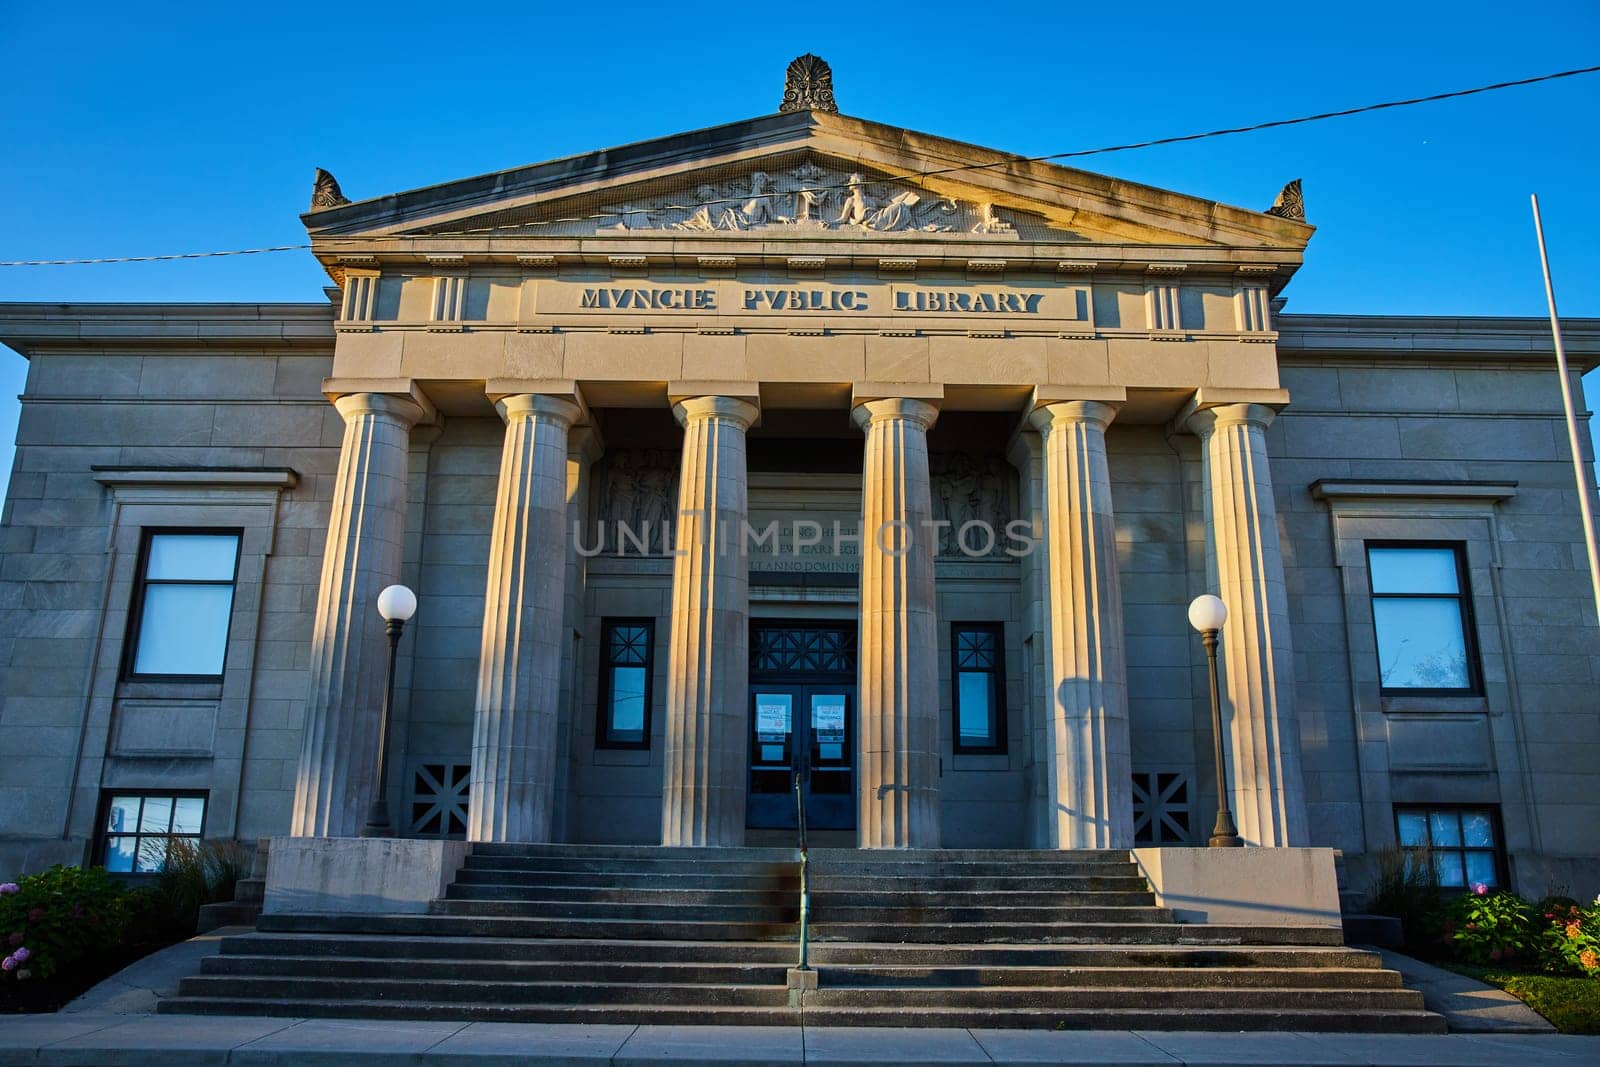 Carnegie-funded Muncie Public Library in Indiana, captured in the golden sunrise light, showcasing neoclassical architectural details